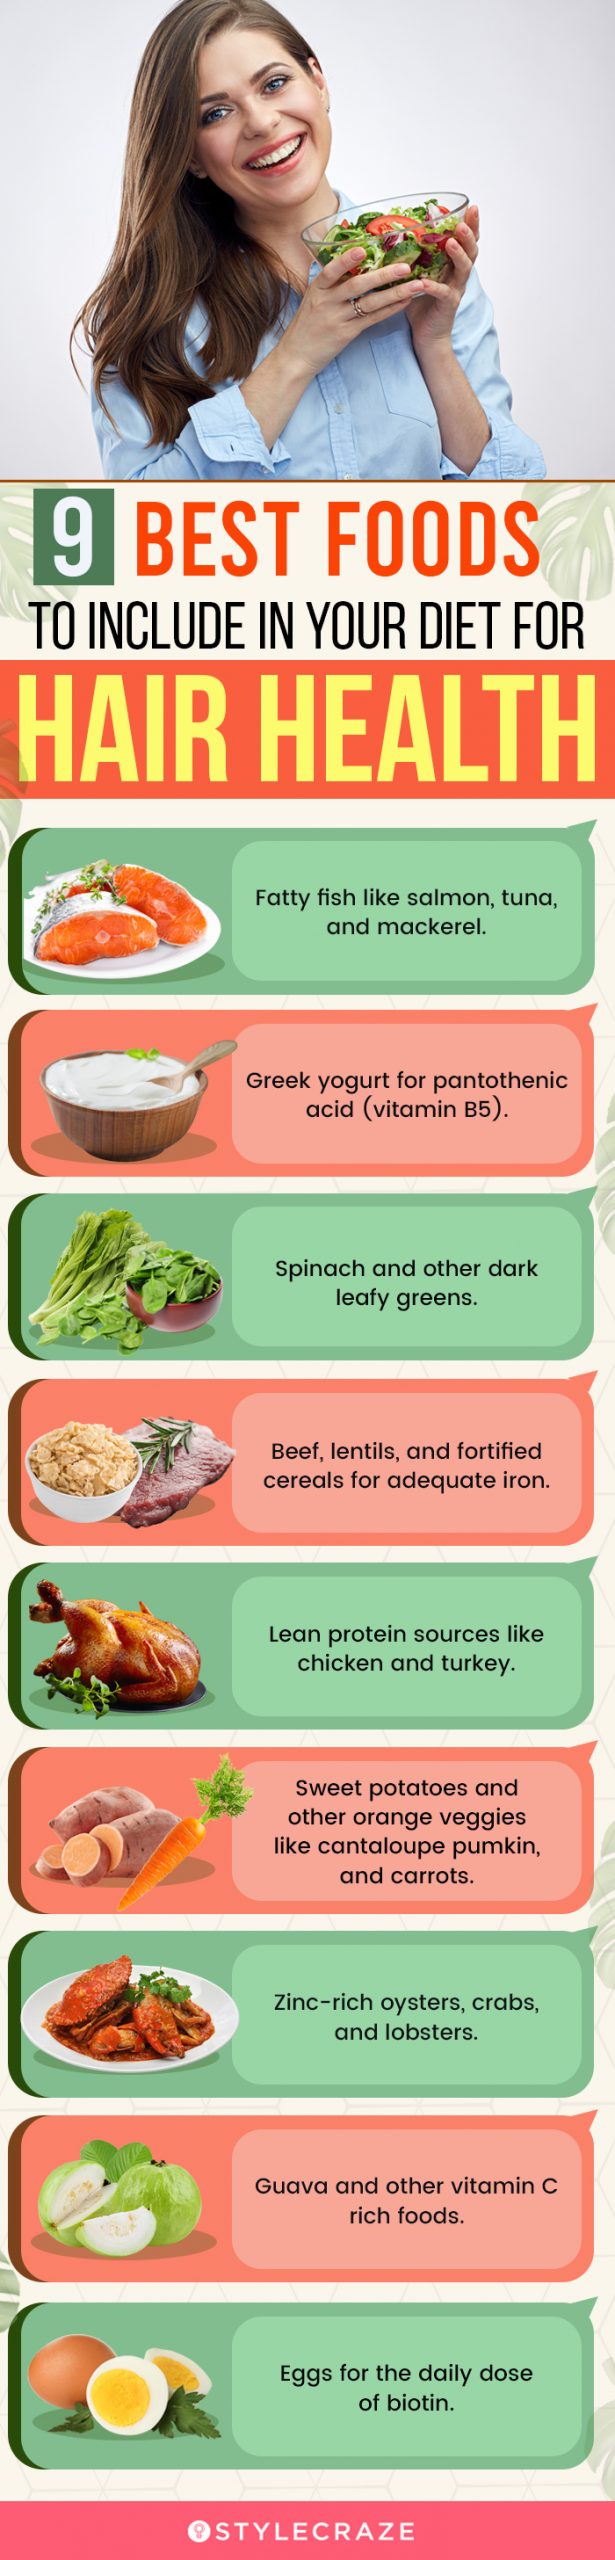 9 best foods to include in your diet for hair health (infographic)